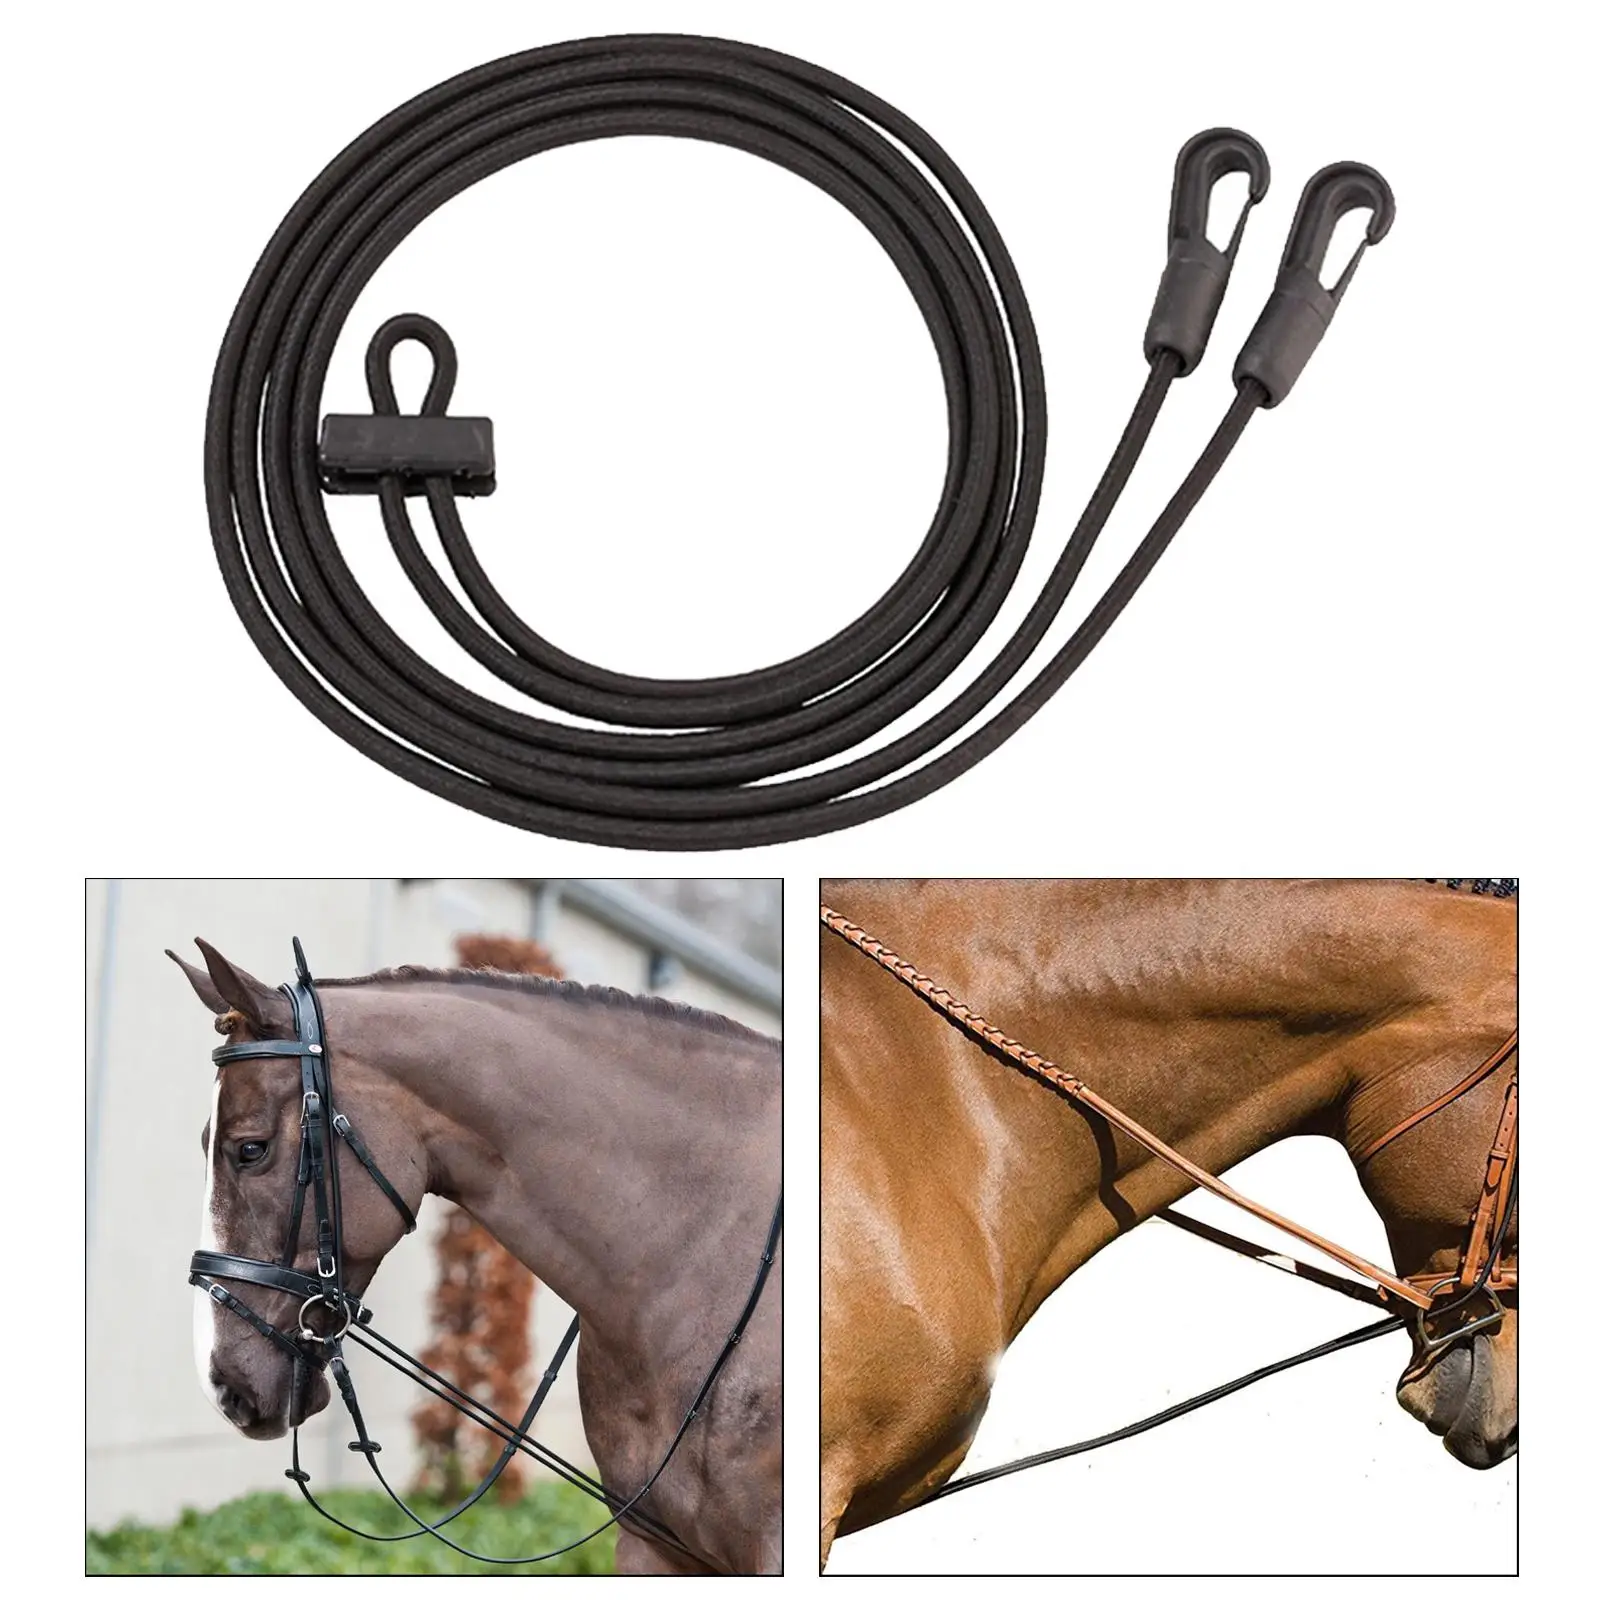 Horse Reins Pulling Training Rope Wear Resistant Leading Headcollar for Horses Harness Outdoor Sports Care Grooming Racecourse